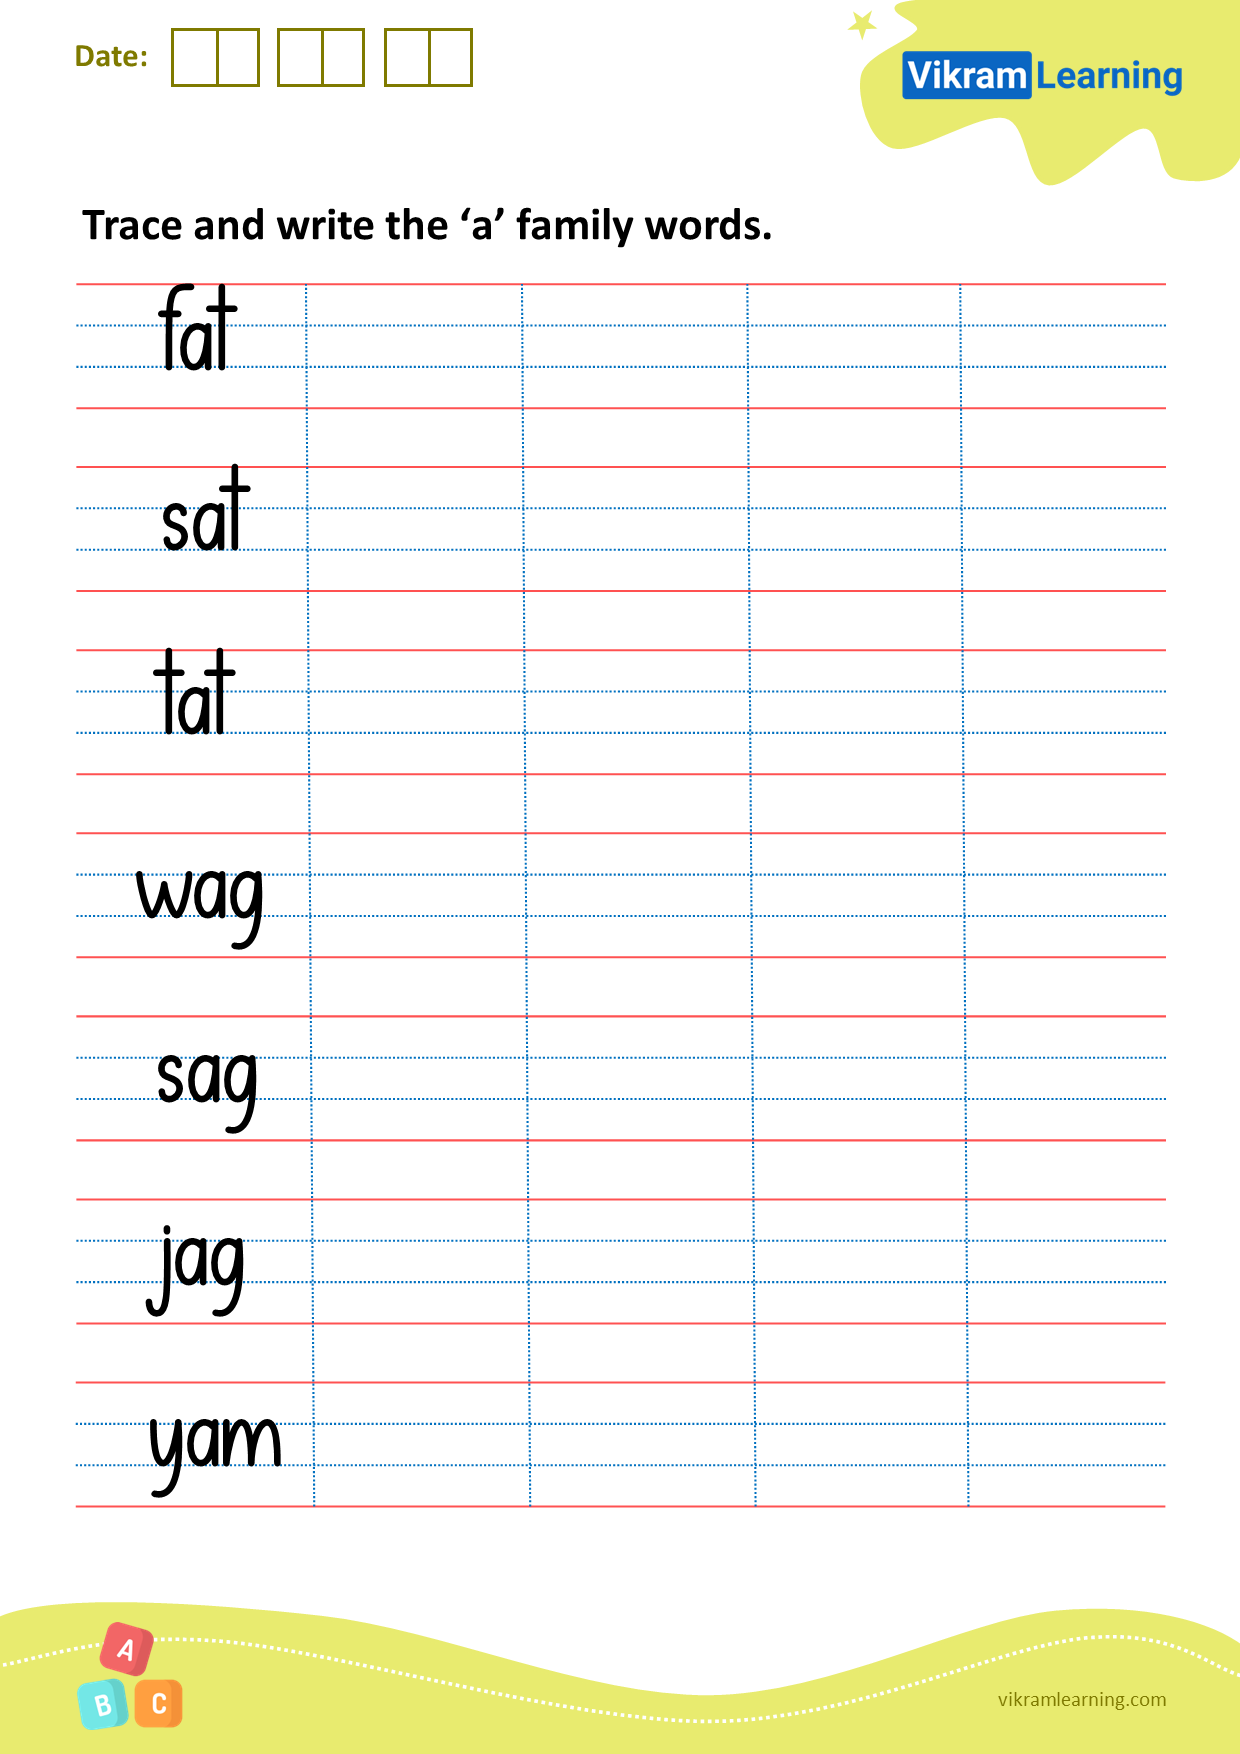 Download trace and write the ‘a’ family words worksheets